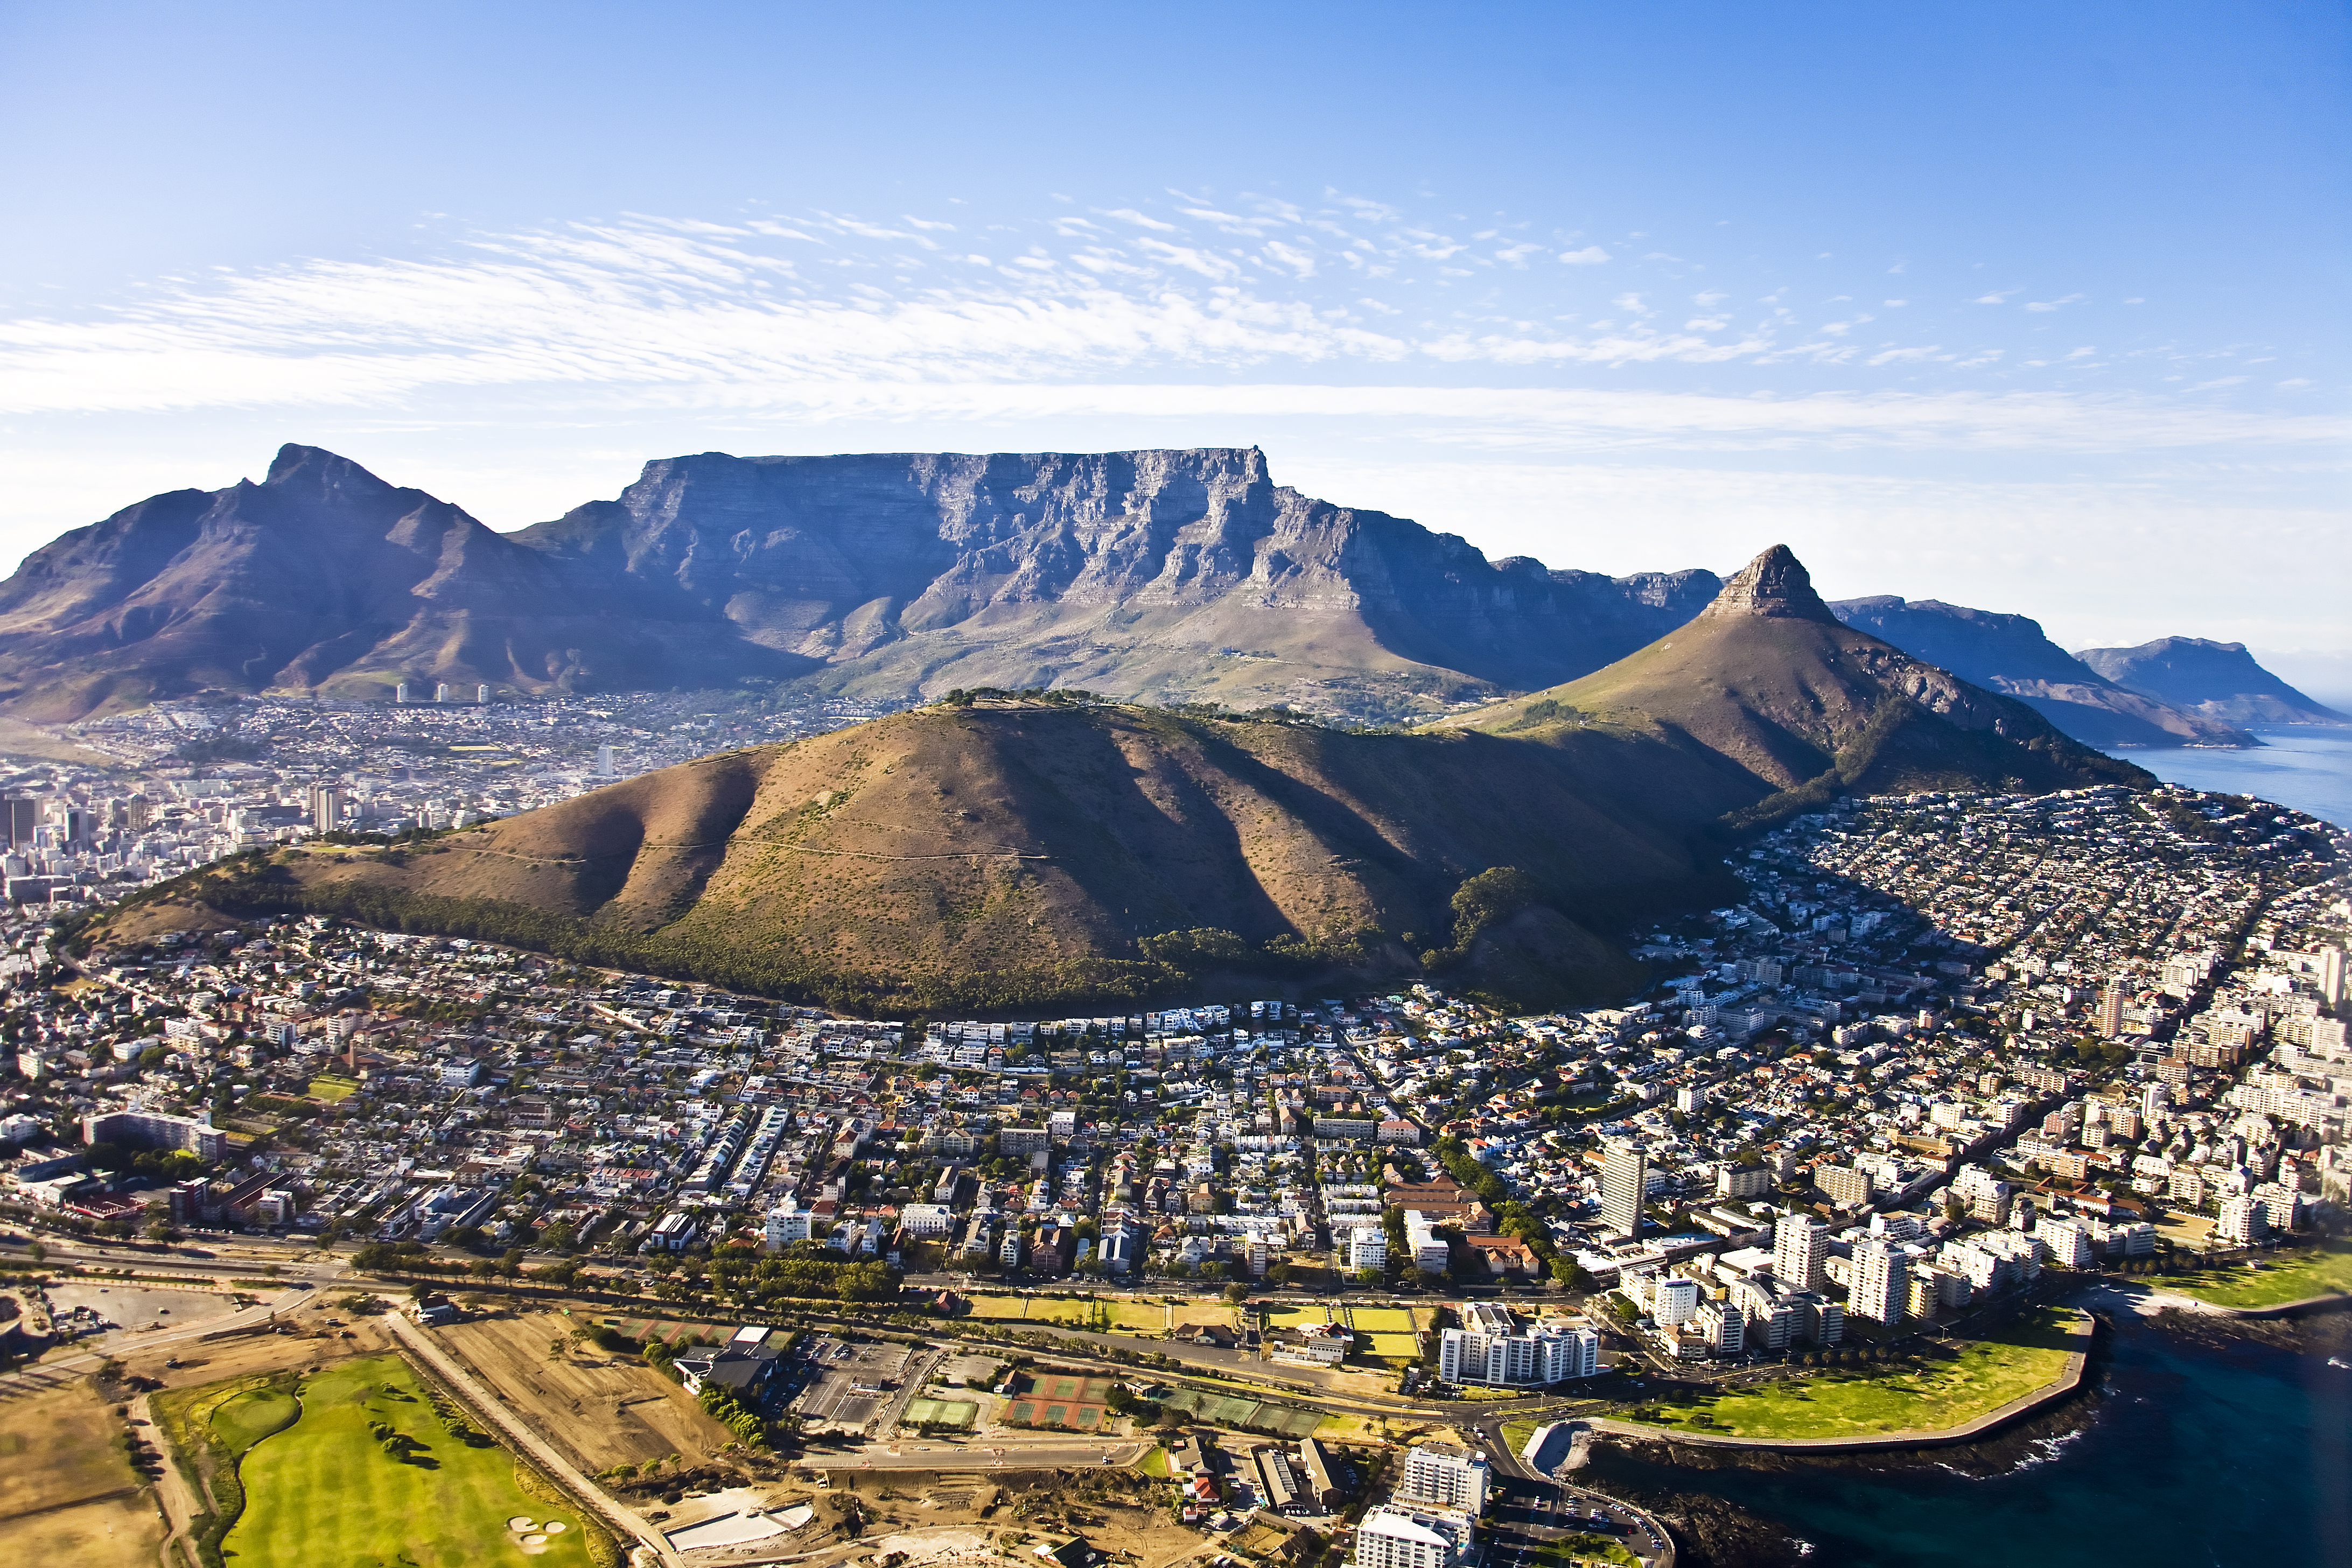 Cape Town Aerial View